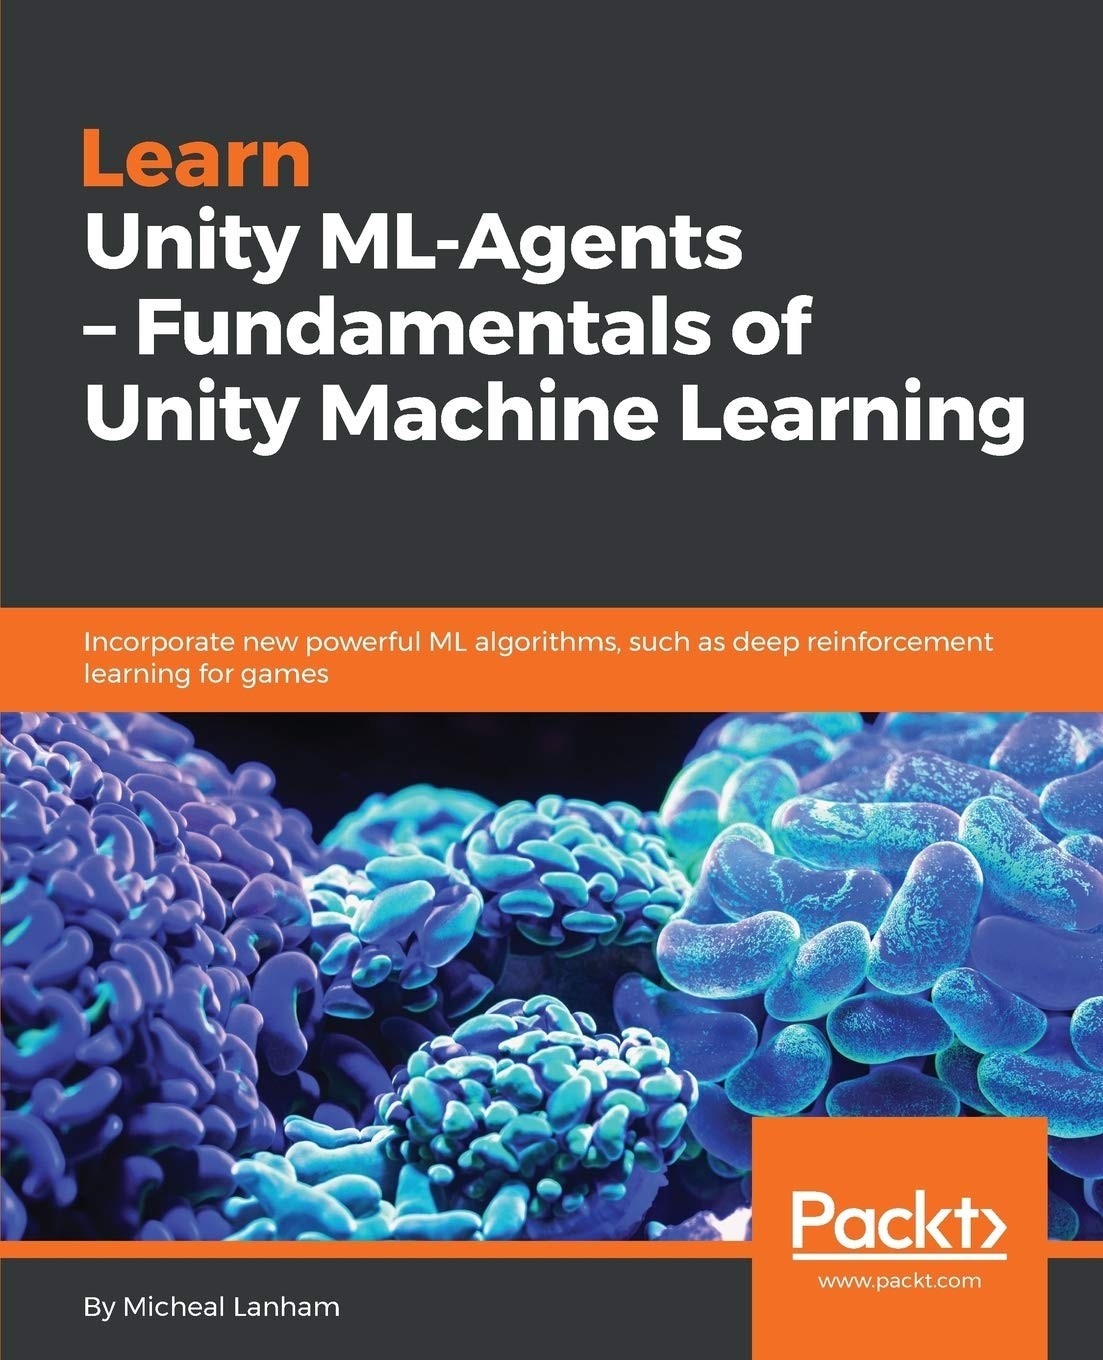 Learn Unity ML-Agents - Fundamentals of Unity Machine Learning: Incorporate New Powerful ML Algorithms Such as Deep Reinforcement Learning for Games